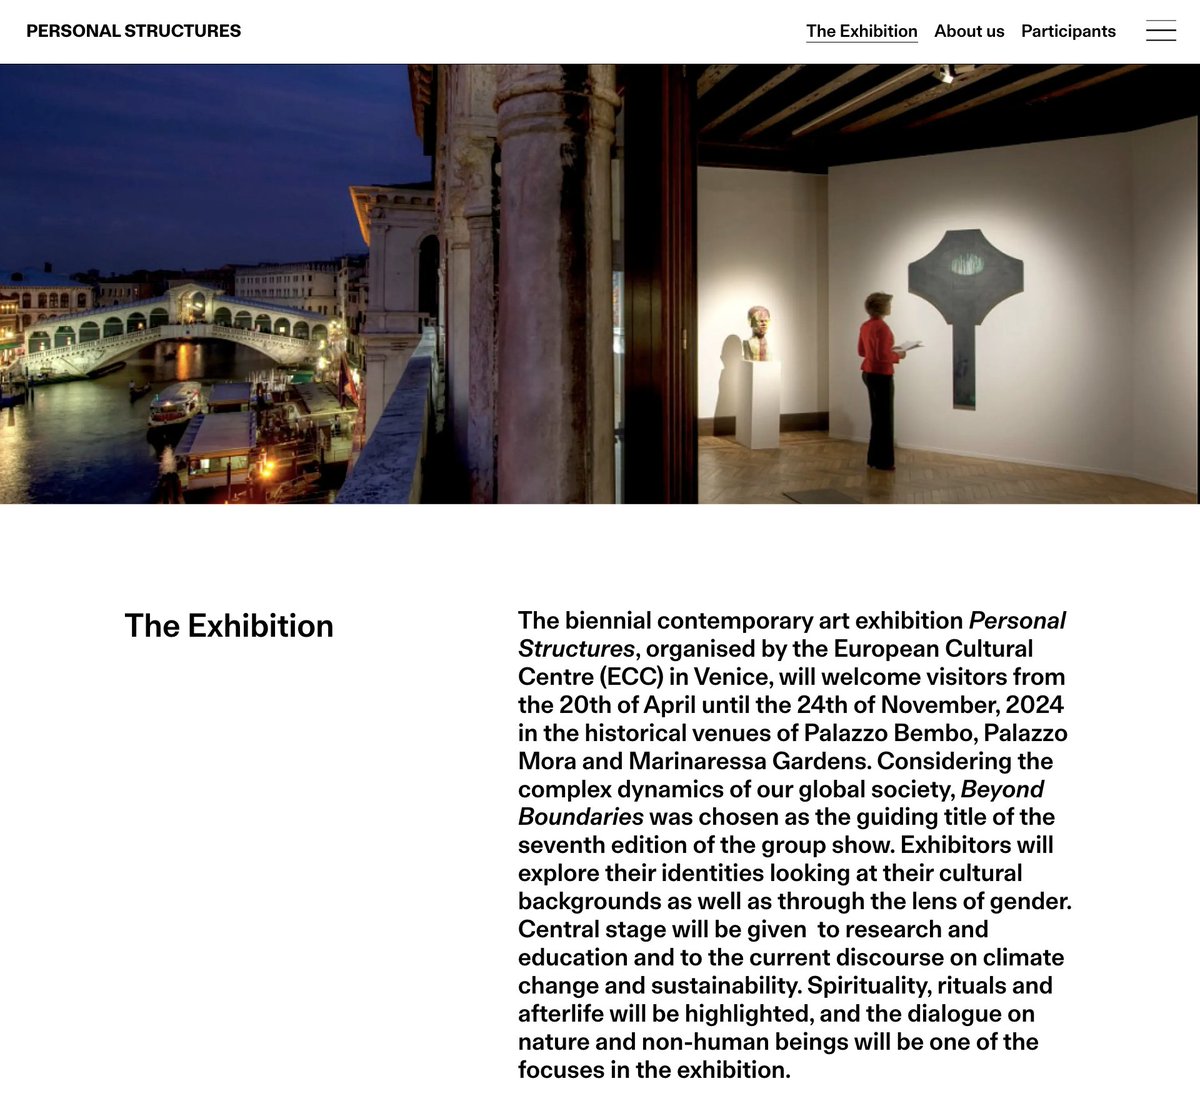 Soul fish will be showcasing in Palazzo Bembo, 1F C03 during the Venice Biennale exhibition. personalstructures.com/the-exhibition/